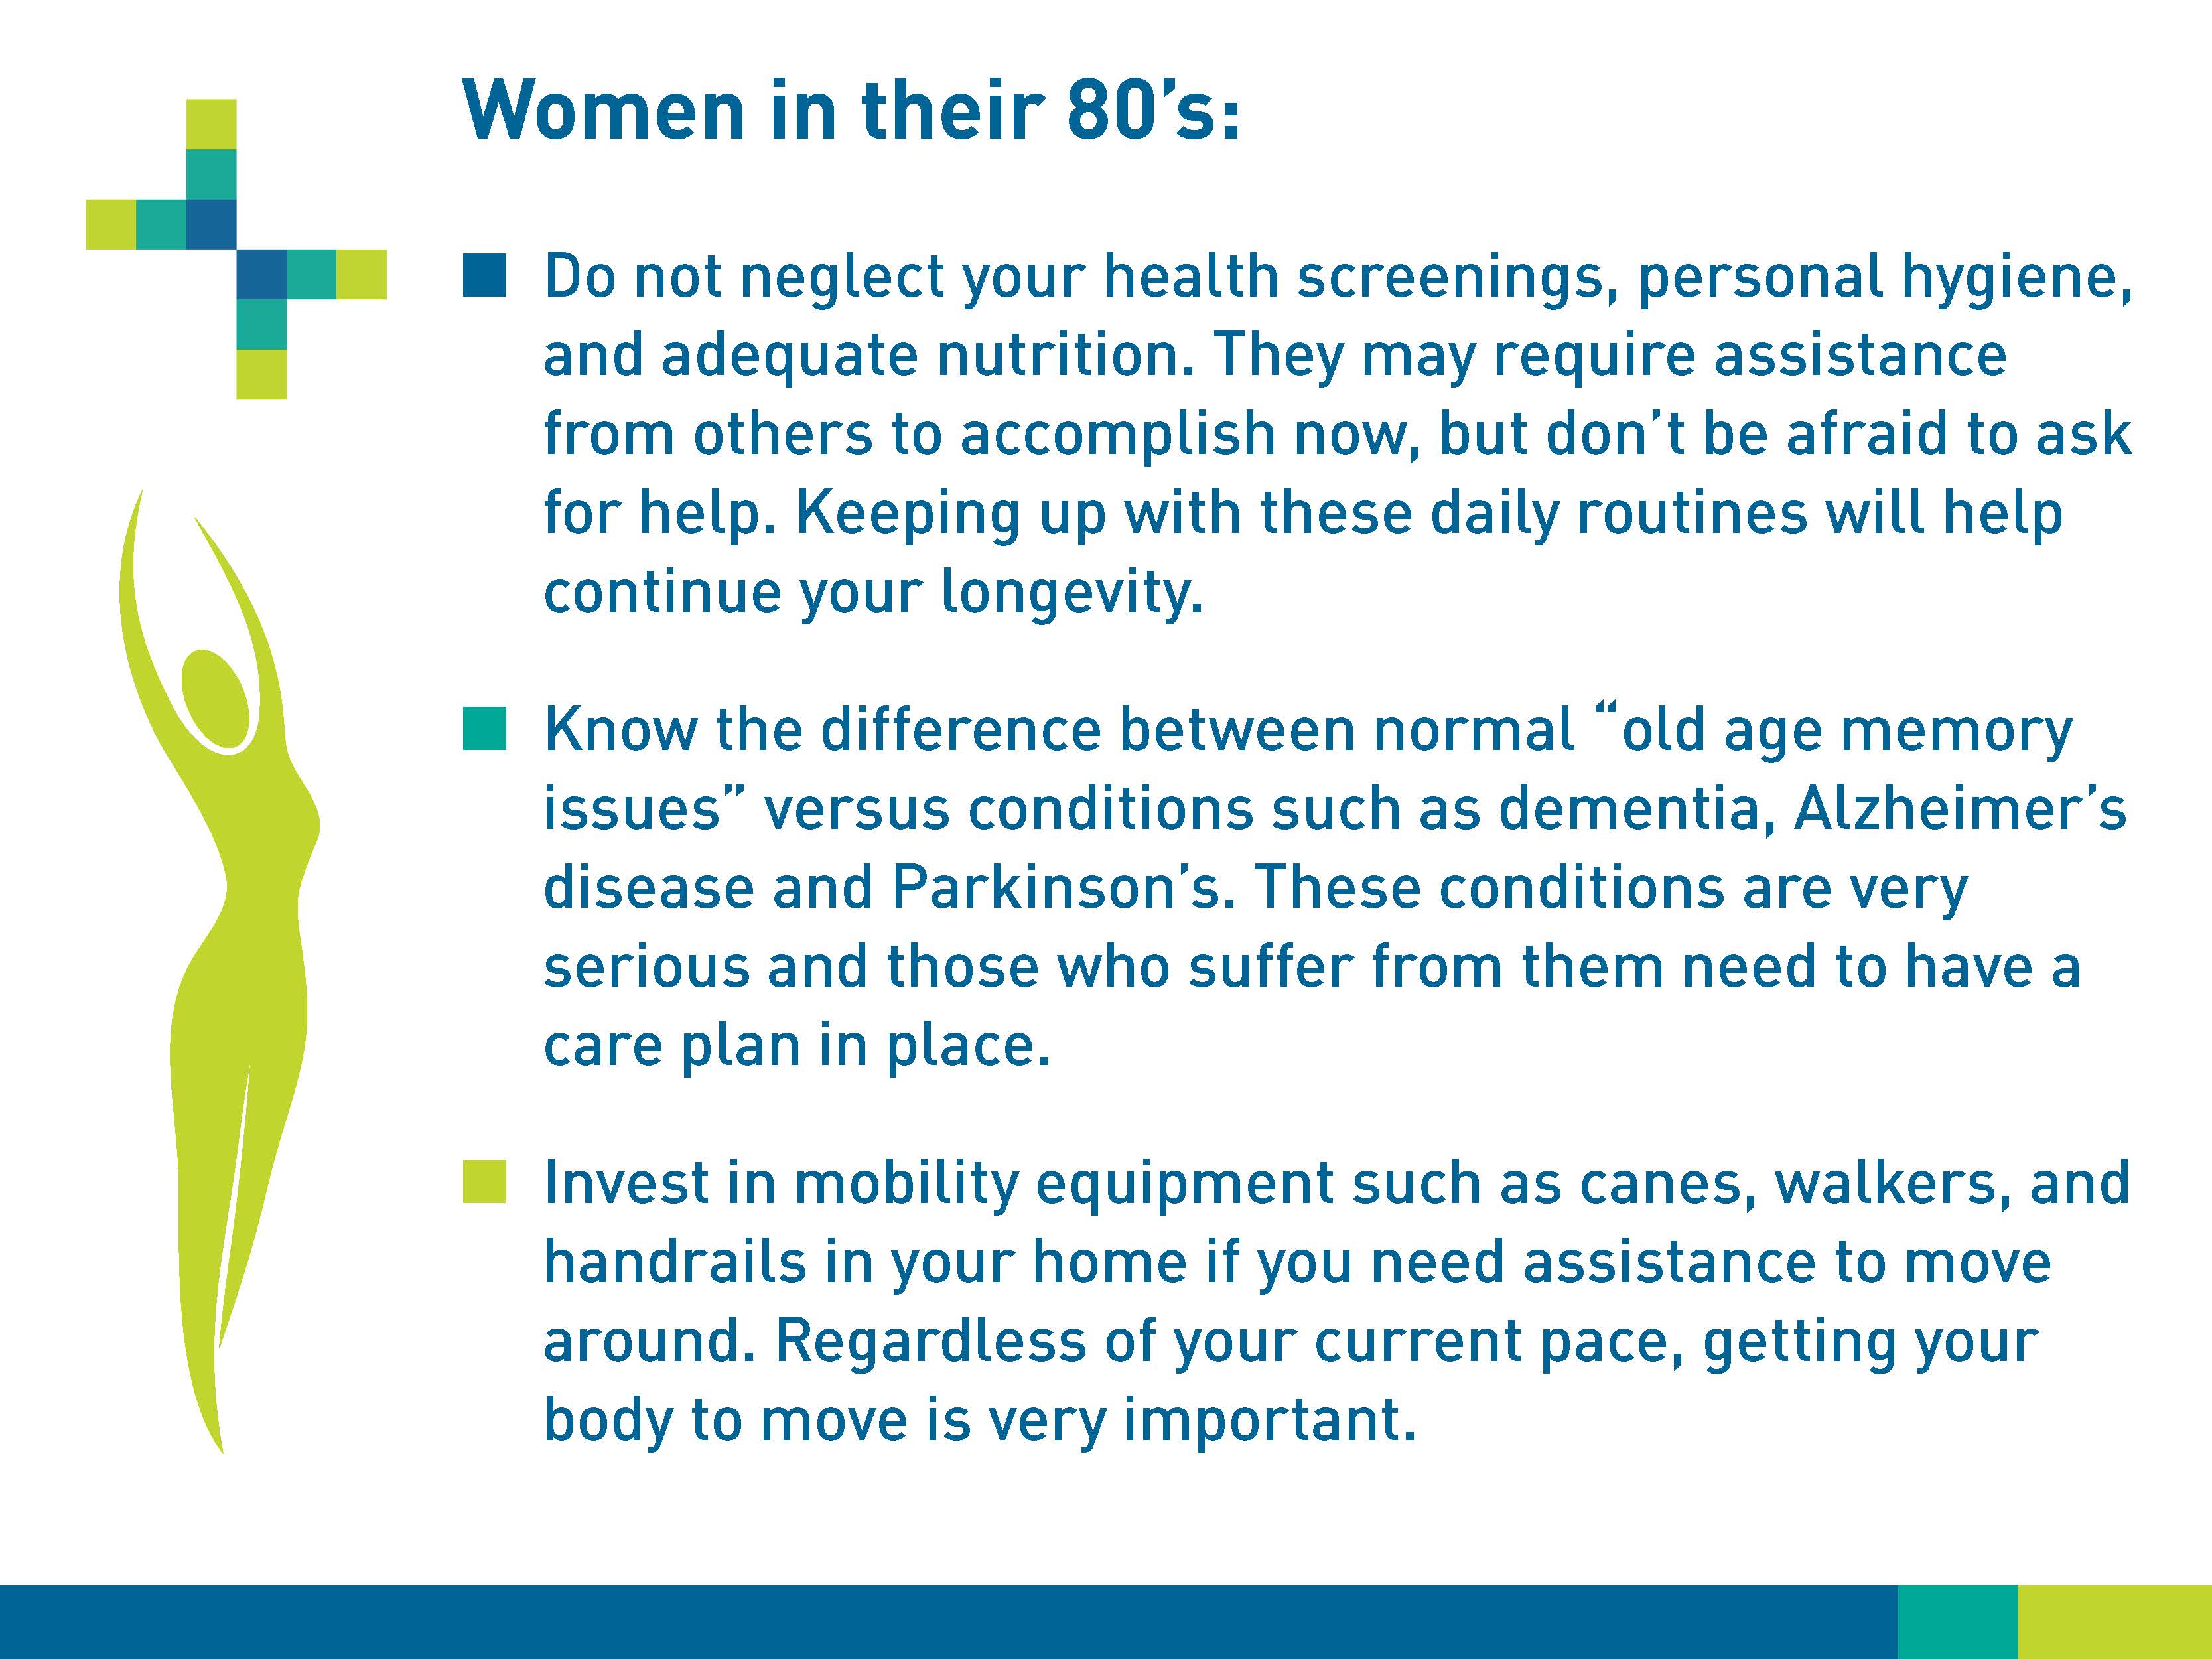 Women in their 80s: Do not neglect your health screenings, personal hygiene, and adequate nutrition. They may require assistance from others to accomplish now, but don't be afraid to ask for help. Keeping up with these daily routines will help continue your longevity. Know the differences between normal “old age memory issues” versus conditions such as dementia, Alzheimer’s disease and Parkinson’s. These conditions are very serious and those who sugger from them need to have a care plan in place. Invest in mobility equipment such as canes, walkers, and handrails in your home if you need assistance to move around. Regardless of your current pace, getting your body to move is very important.